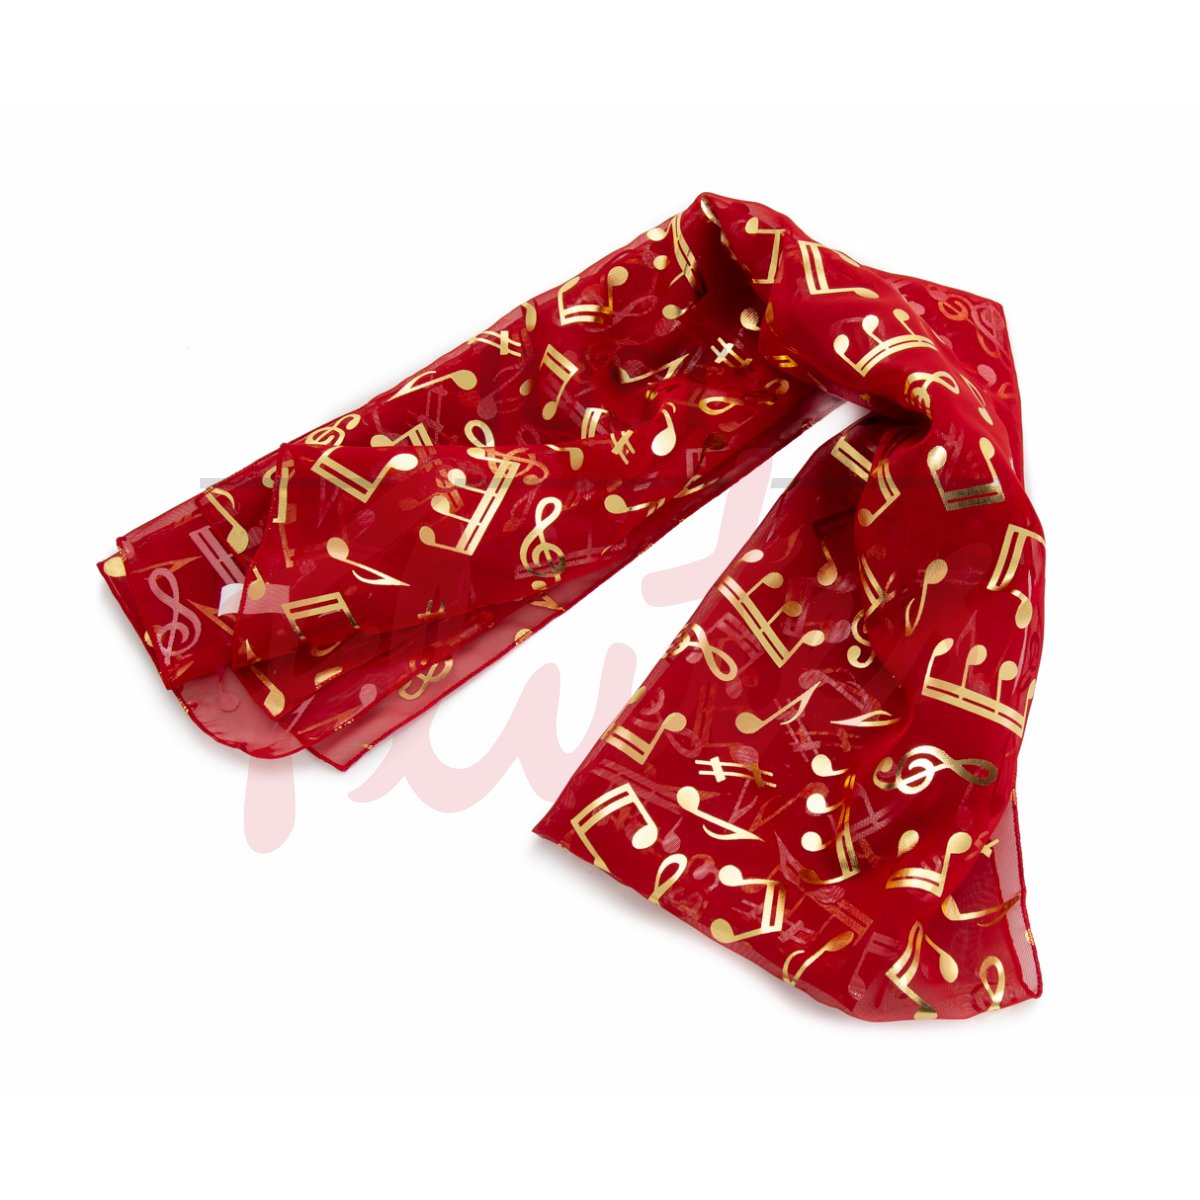 Music Scarf, Gold Notes on Red Foil Mesh